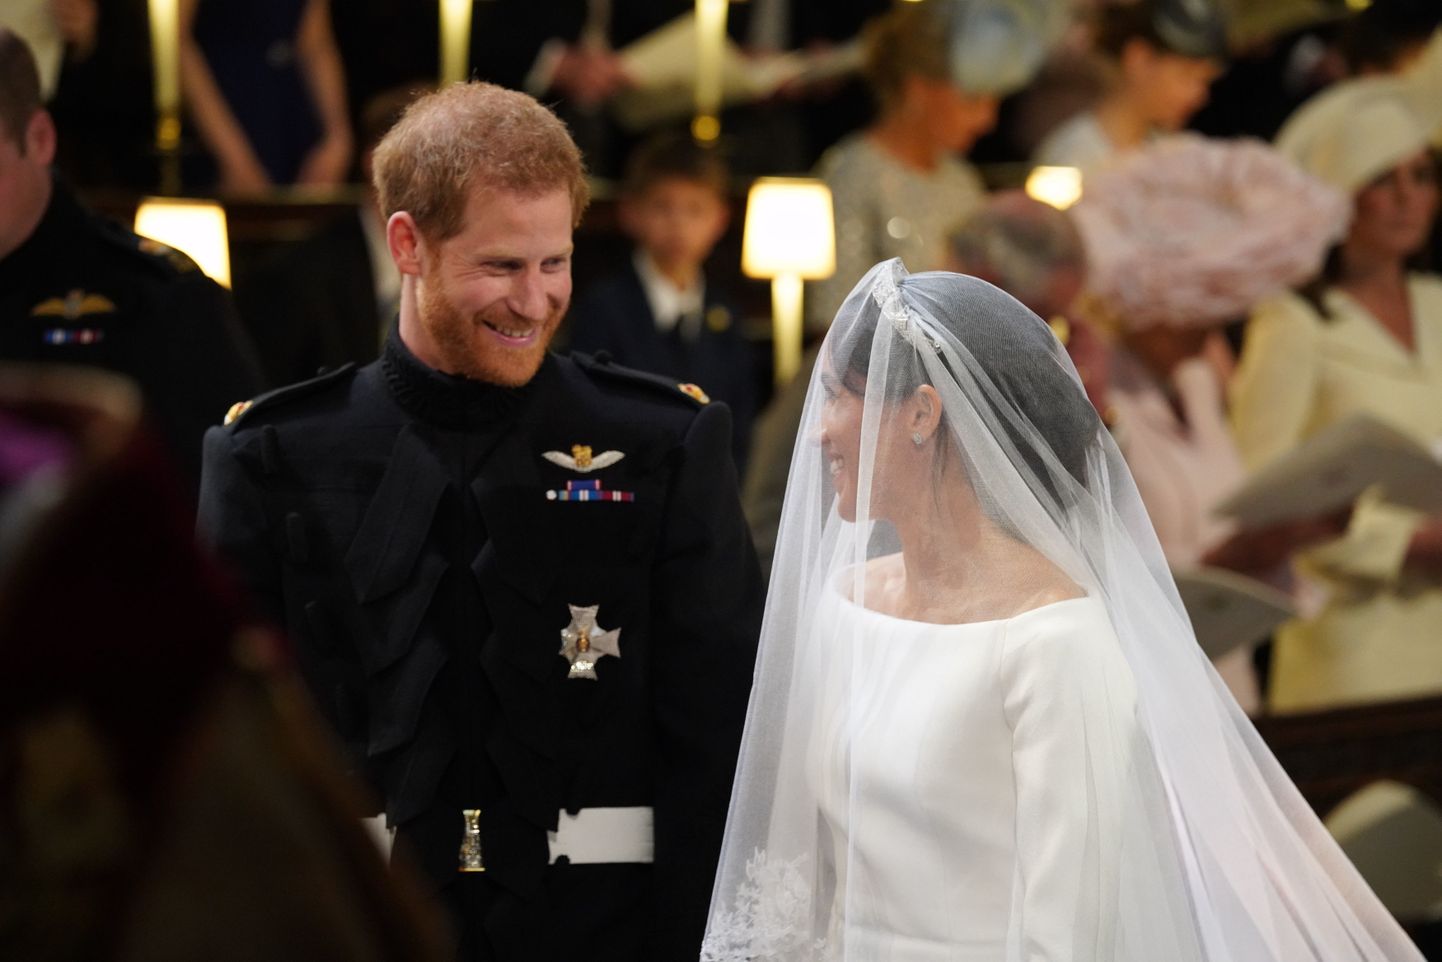 Prince Harry looks at his bride, Meghan Markle, as she arrives accompanied by the Prince of Wales in St George's Chapel at Windsor Castle for their wedding.